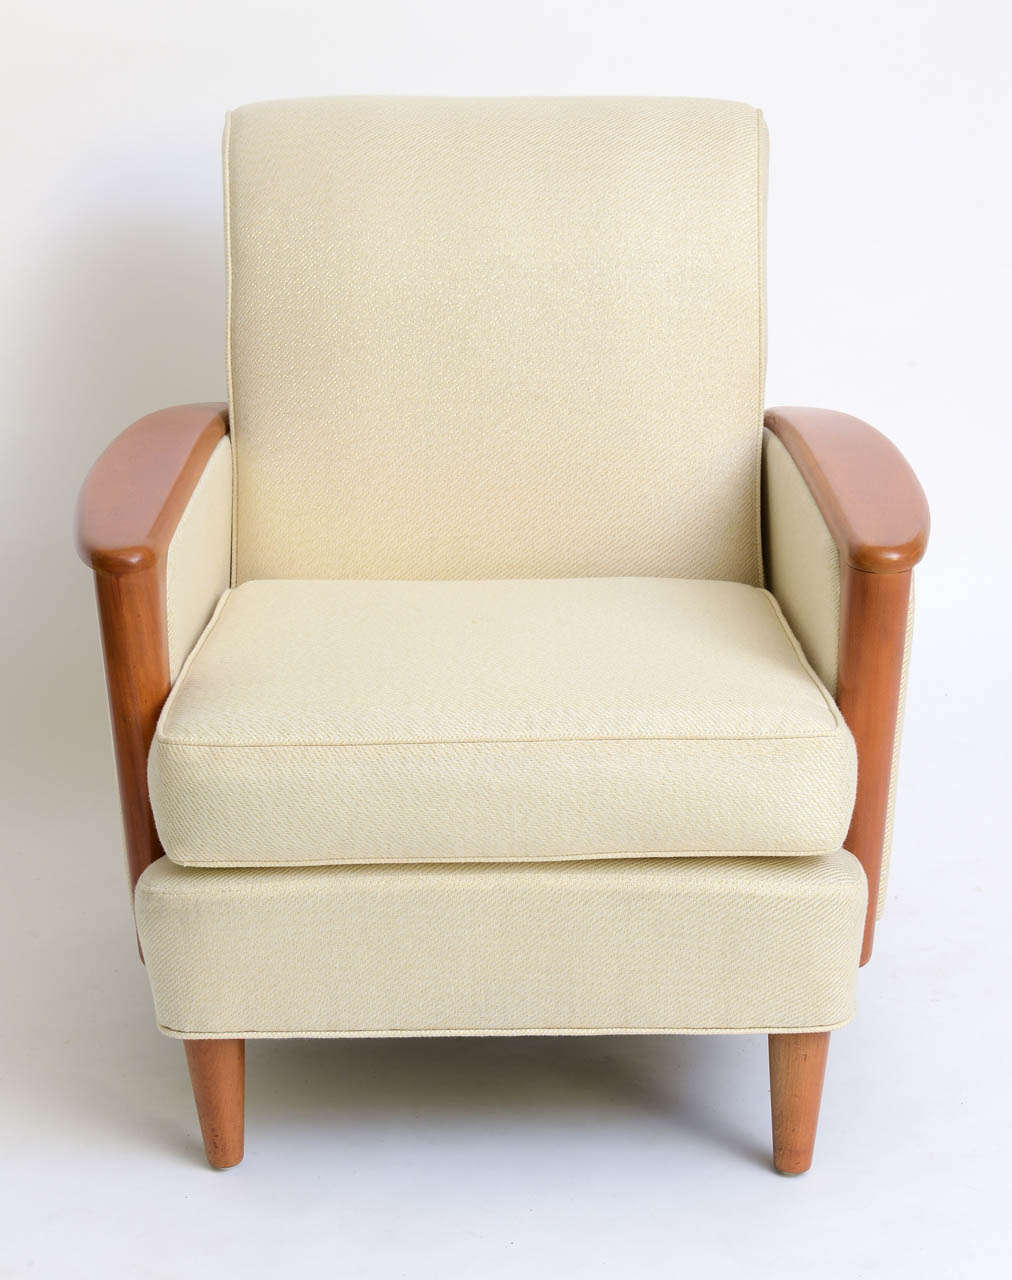 SOLD  Heywood Wakefield Streamline Modern lounge chair. Definitely a room anchor, this beefy club chair with the closed in upholstered sides is a period 1941-42 Streamline Modern lounge chair from Heywood Wakefield. Incredibly comfortable and